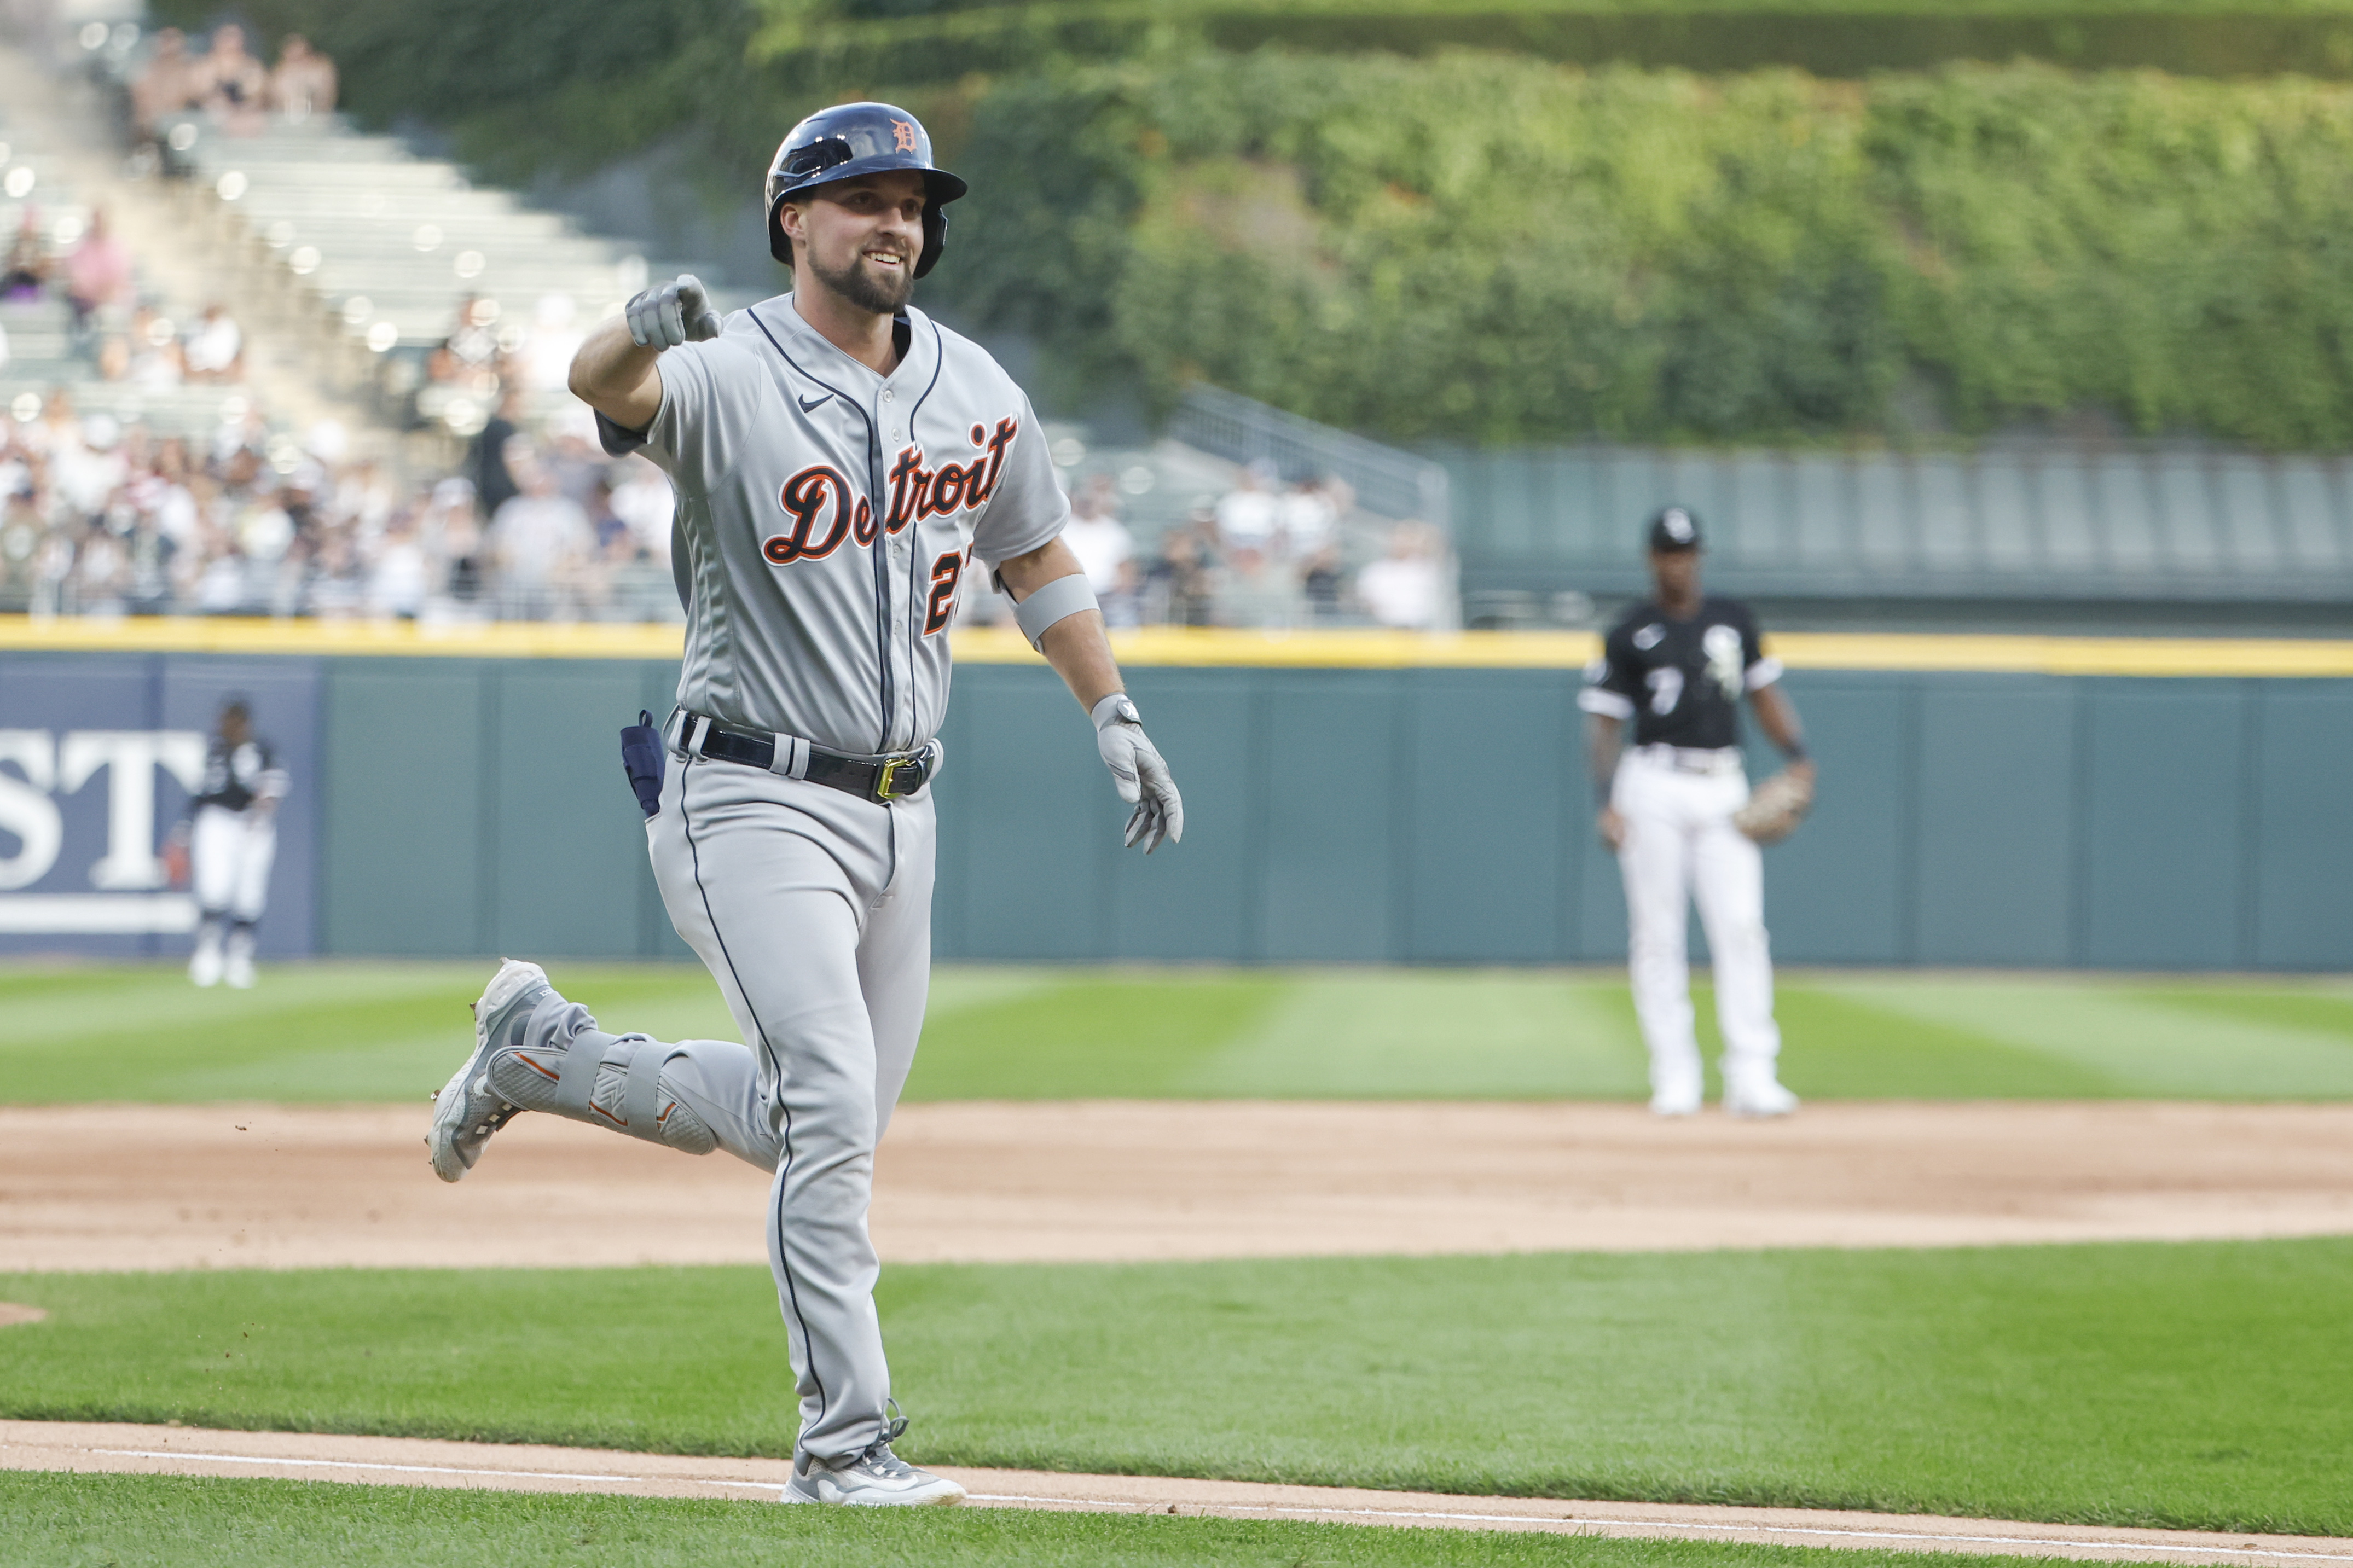 Detroit Tigers 2B Andre Lipcius after hitting a two-run homer against the Chicago White Sox on September 2nd, 2023, in Chicago, Illinois. (Photo by Kamil Krzaczynski of USA Today Sports)